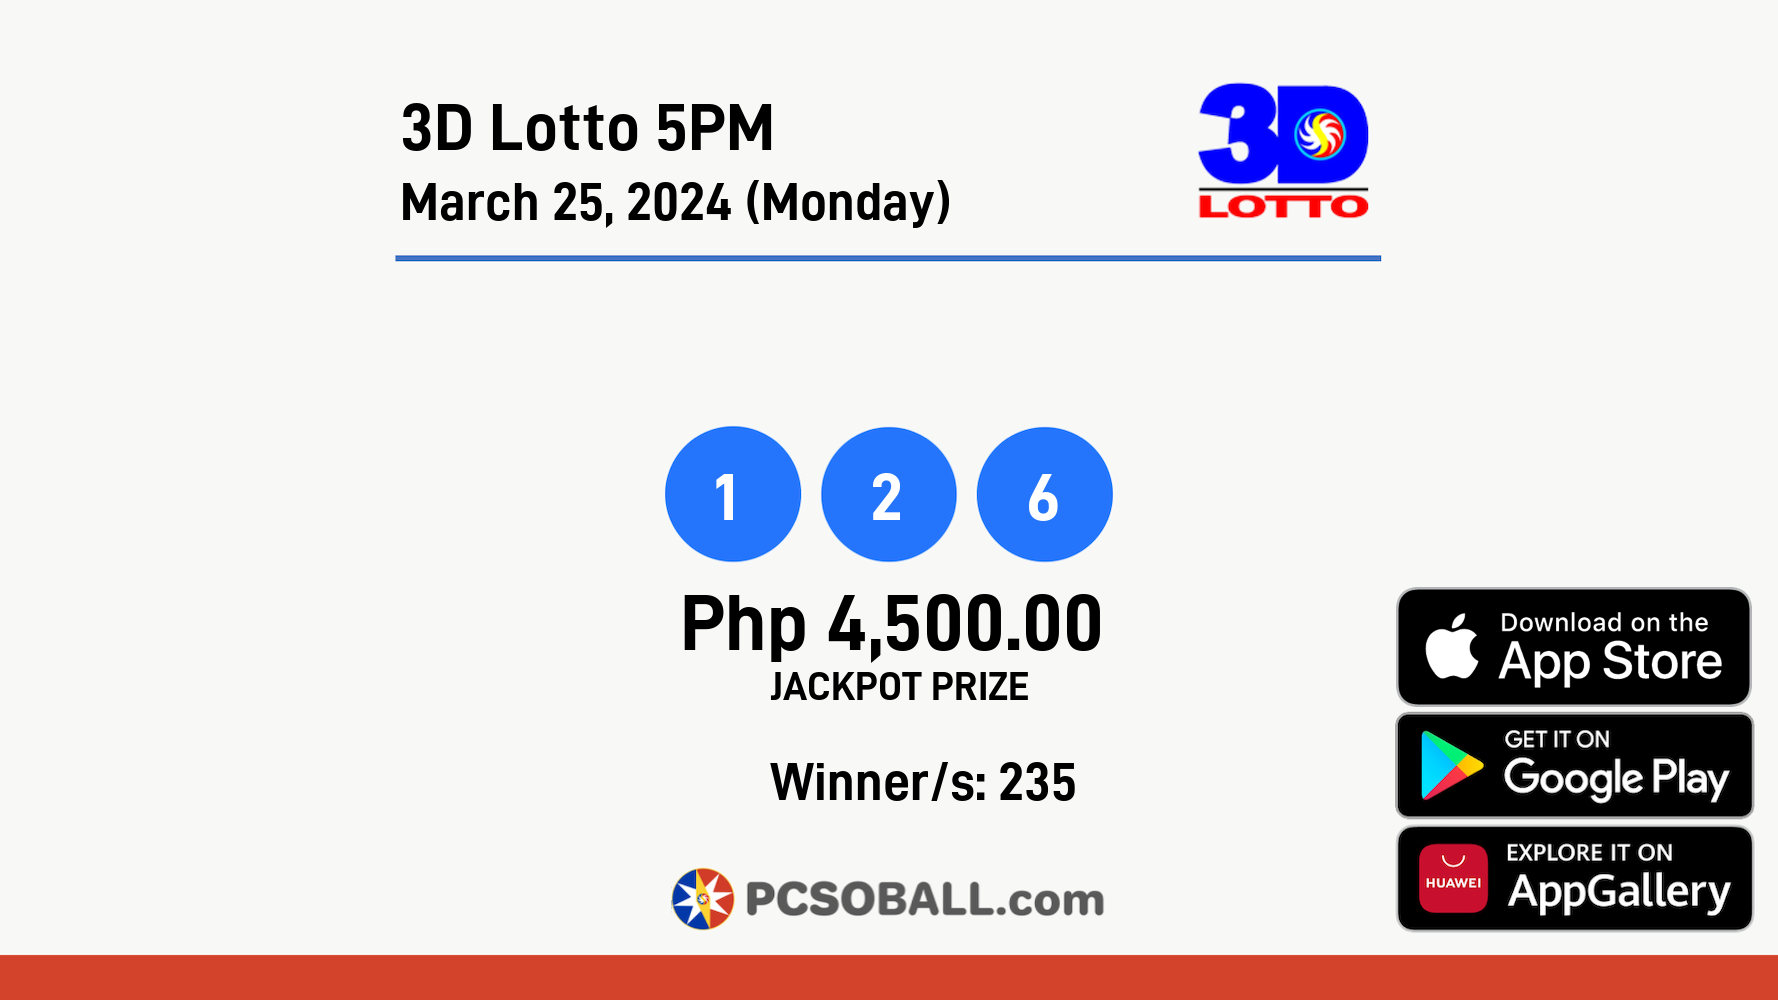 3D Lotto 5PM March 25, 2024 (Monday) Result